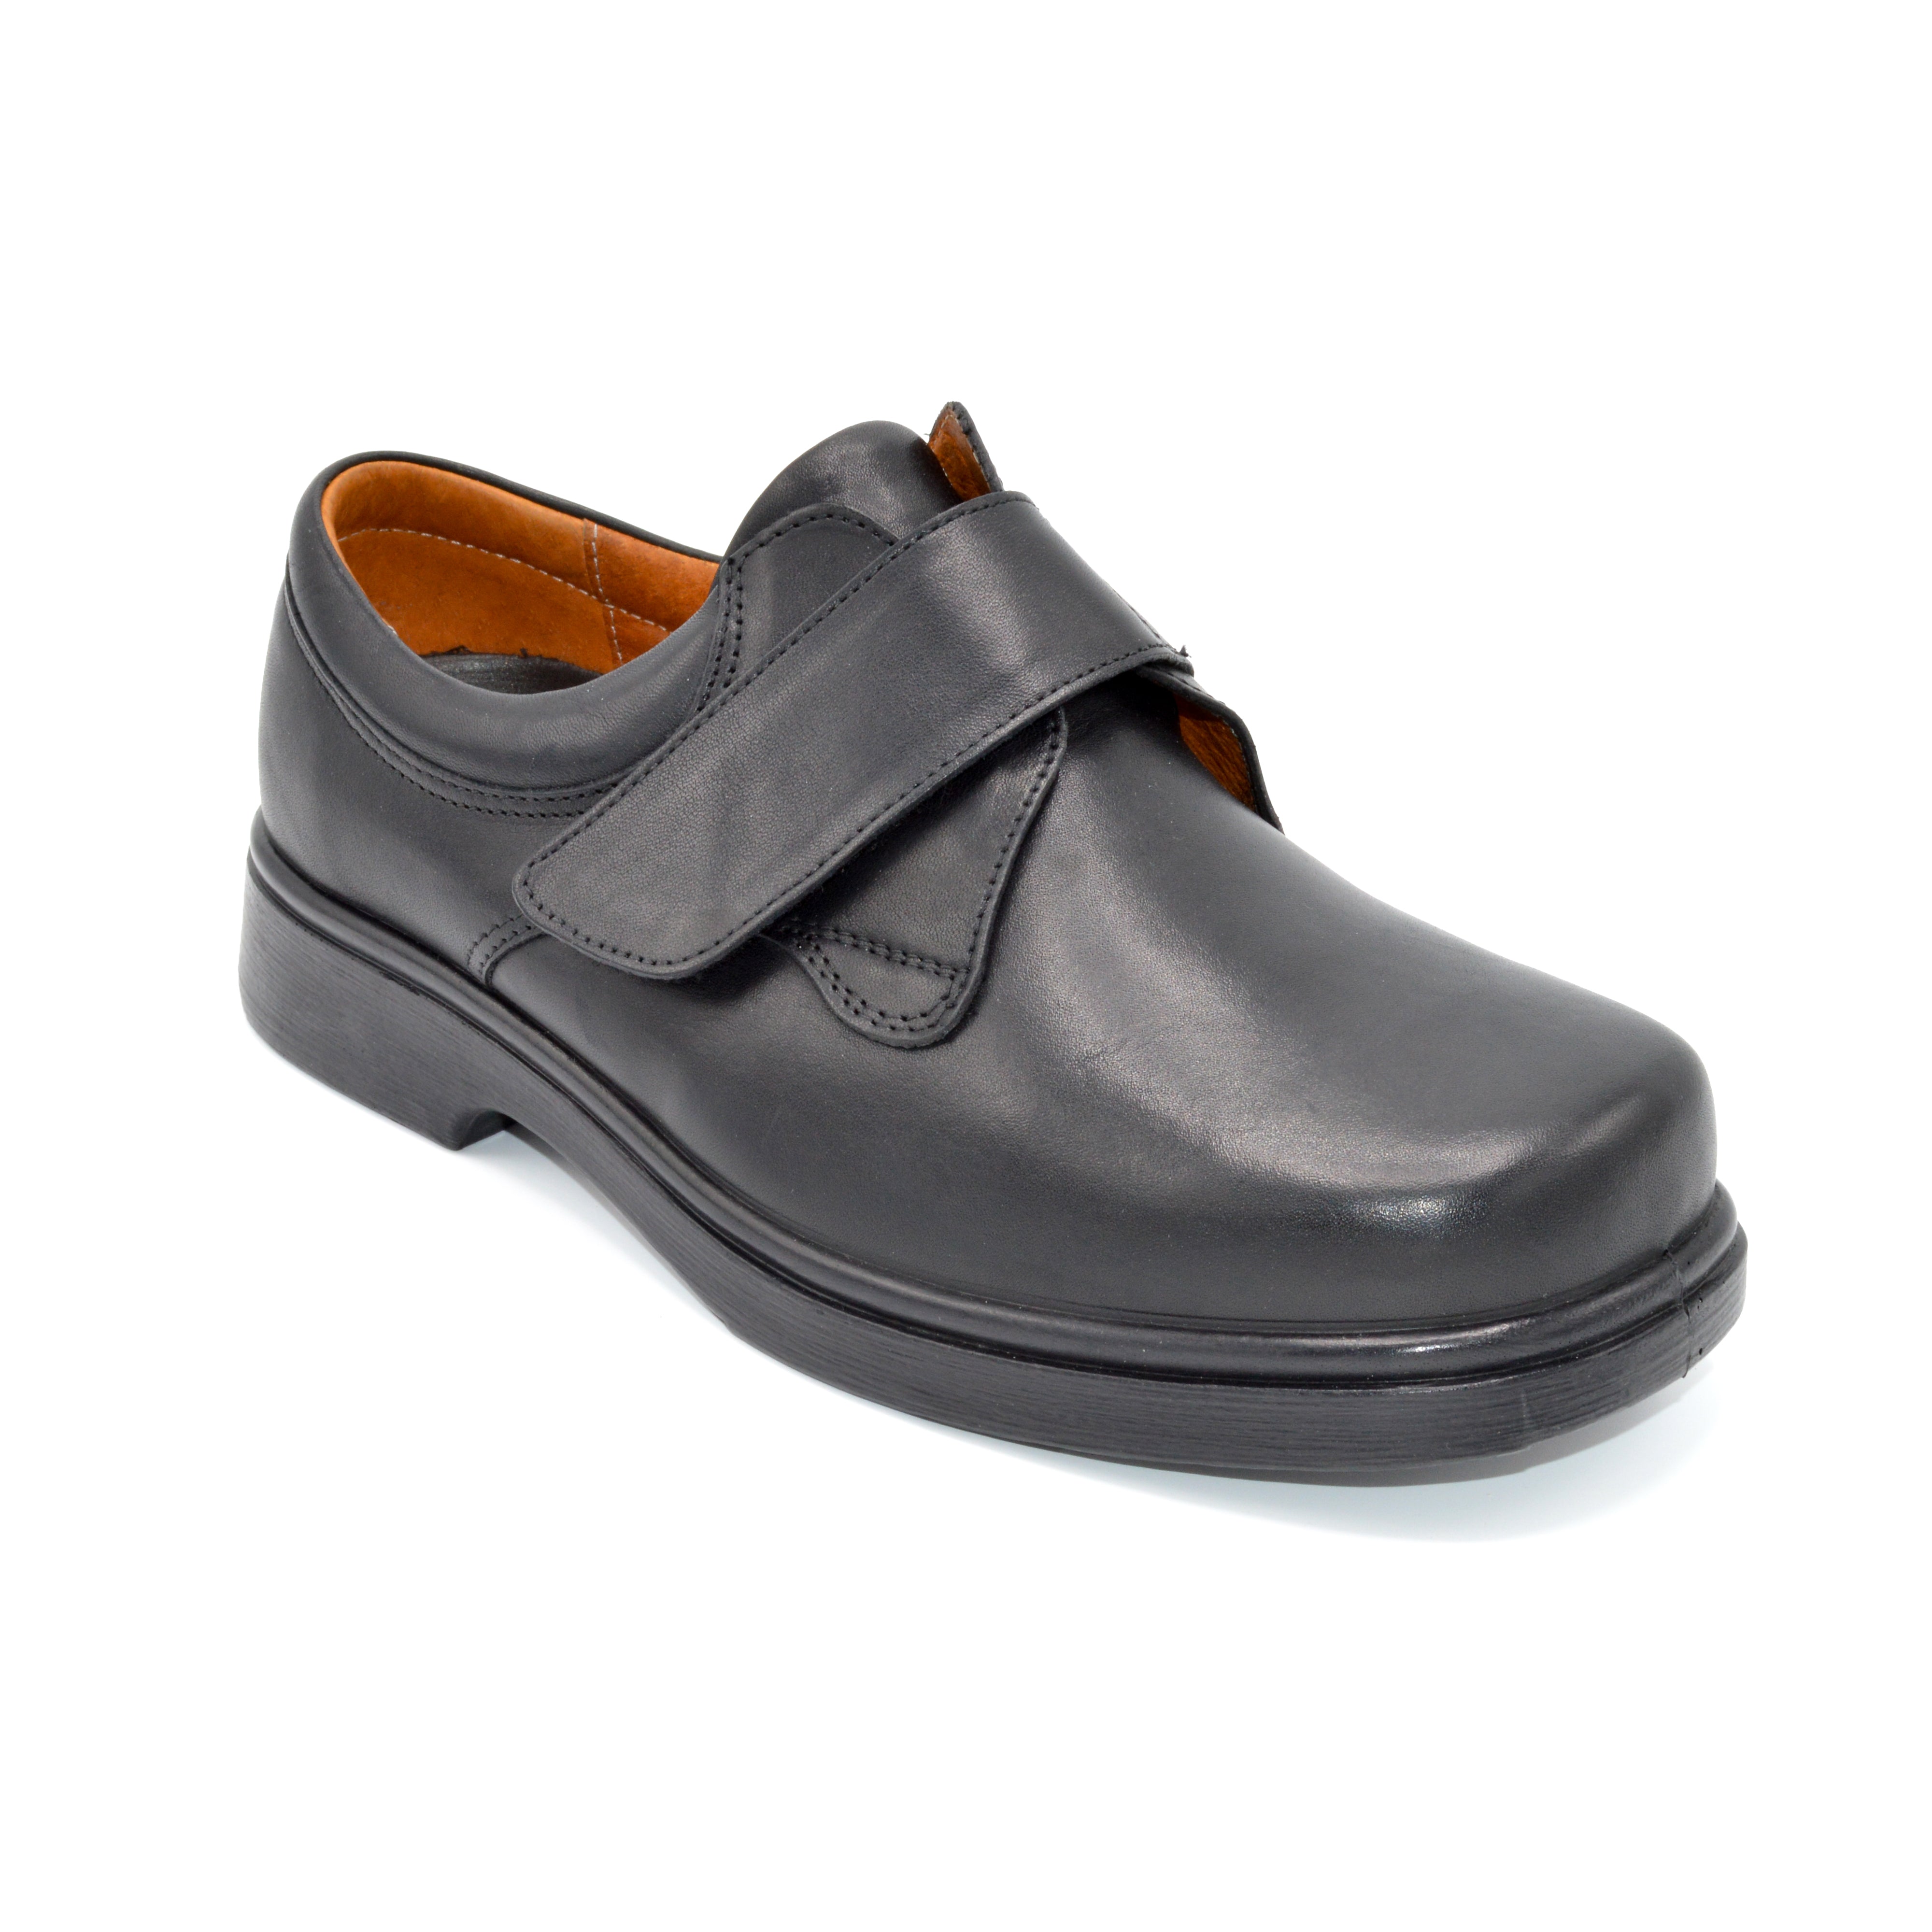 Extra Wide Fitting Shoe. 6E Fit. Velcro 